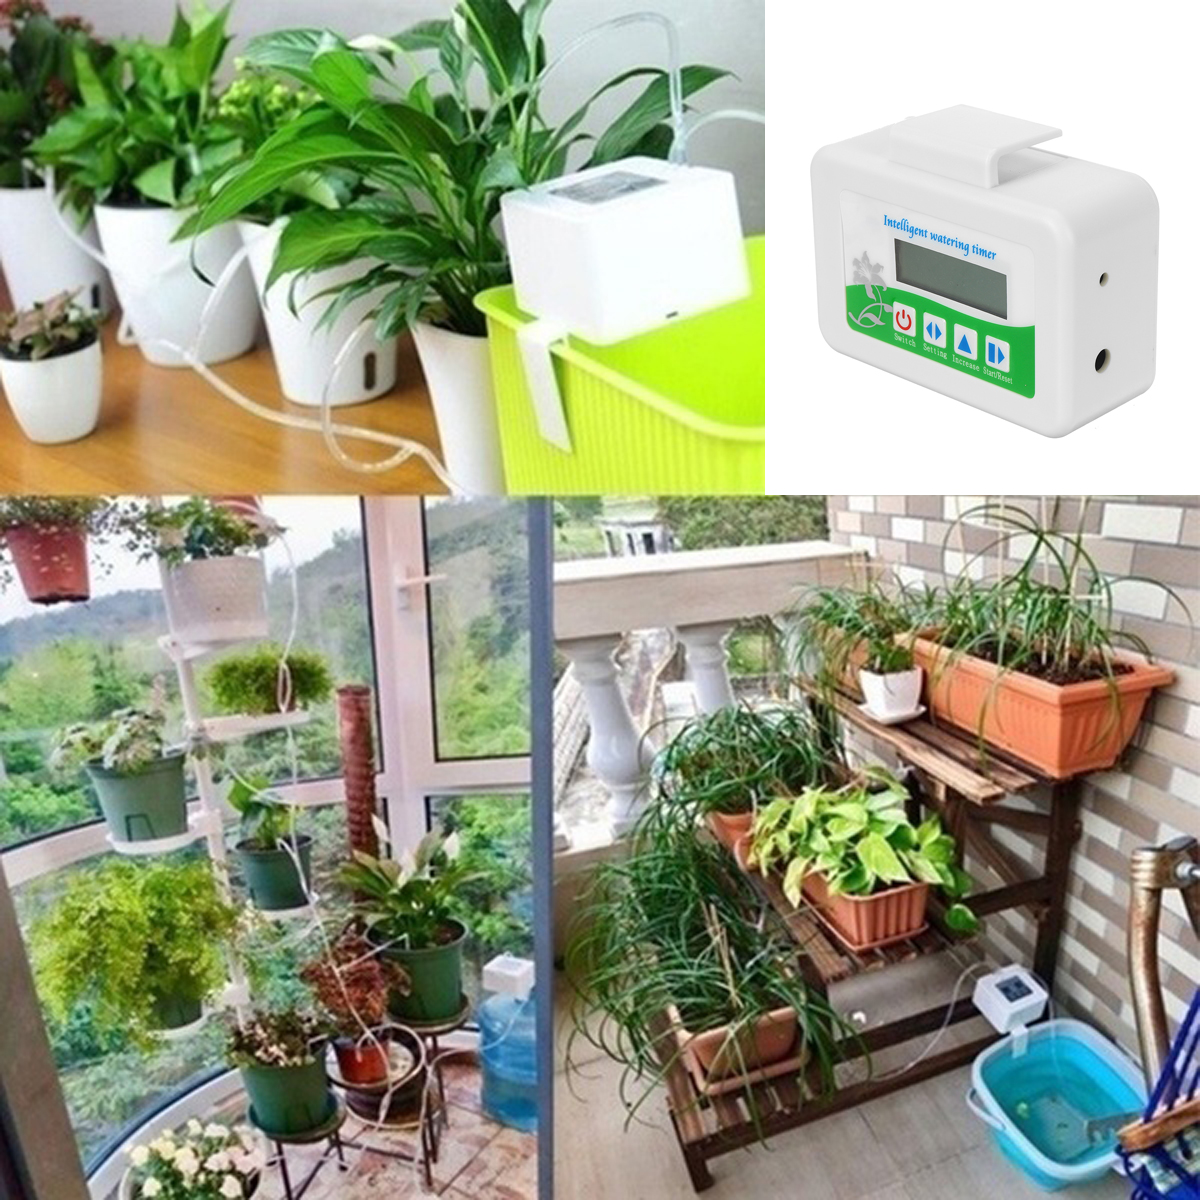 Intelligent-Watering-Timer-Automatic-Solar-Water-Controlle-Irrigation-System-Kit-1711287-9